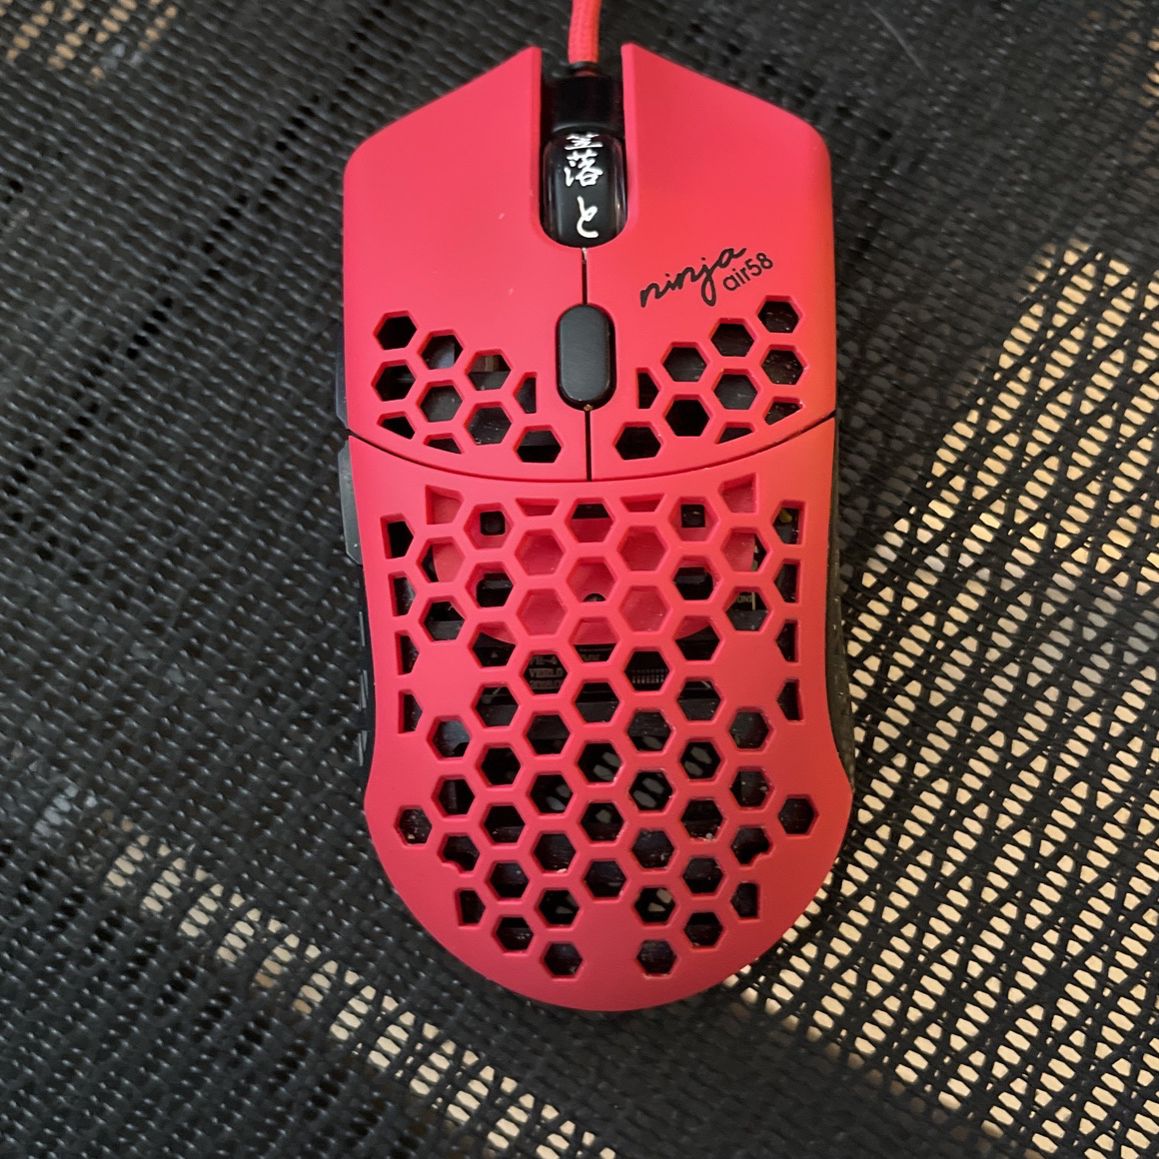 Finalmouse Air58 Ninja Cherry Blossom Red for Sale in New York 